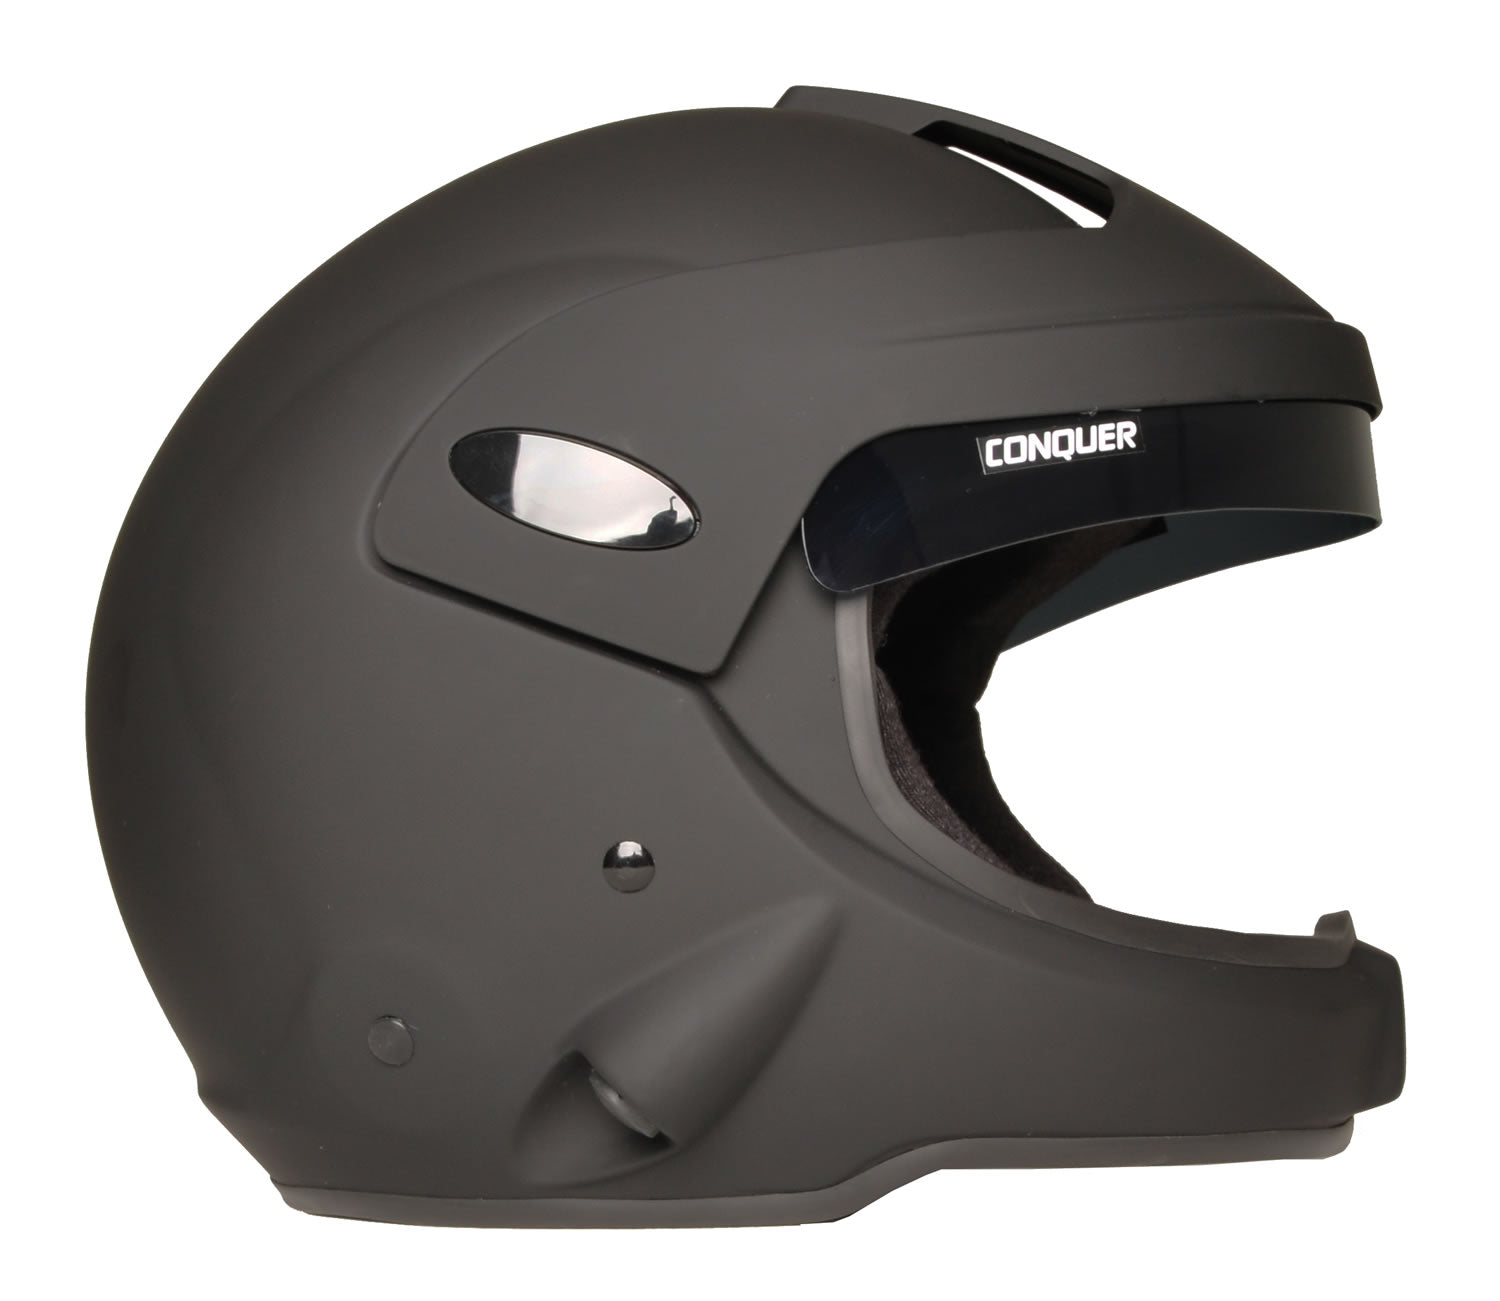 Conquer Snell Sa2015 Approved Open Face Rally Racing Helmet